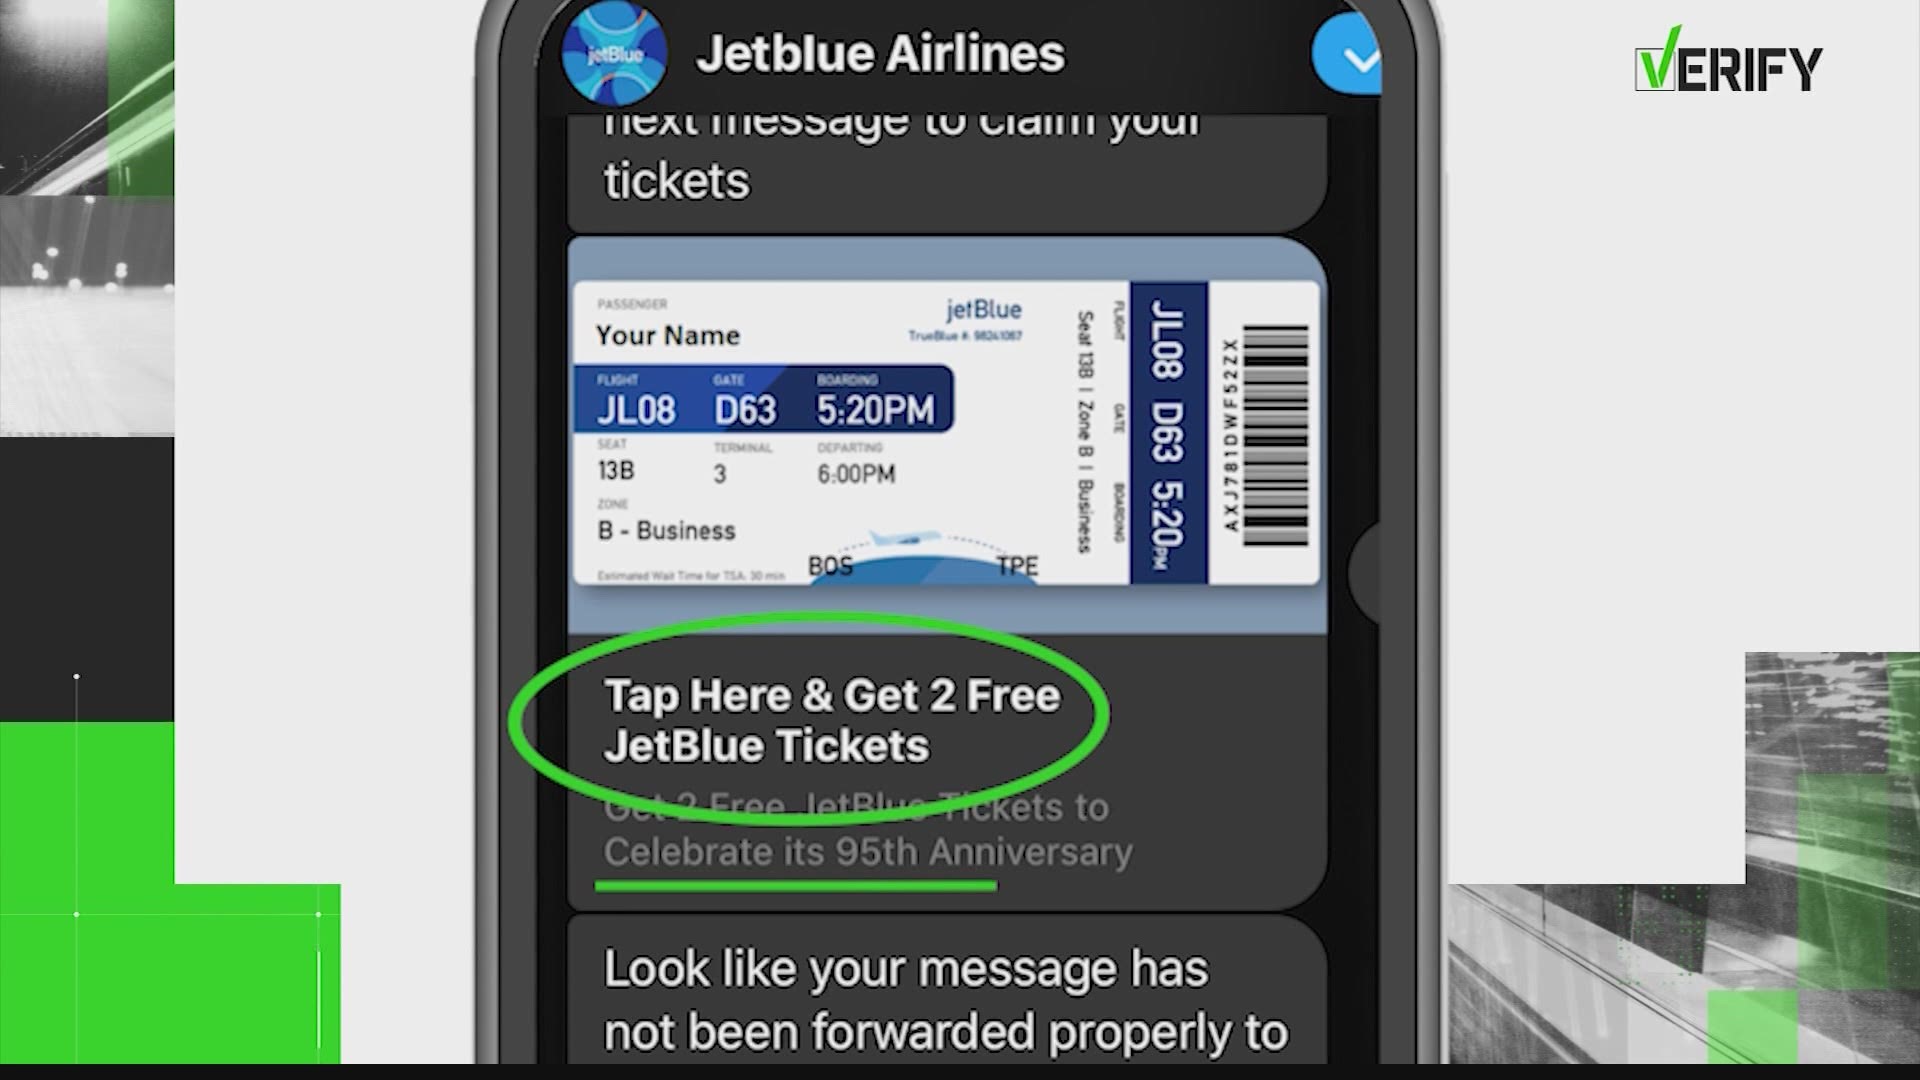 JetBlue says messages going around via text and social media offering free airfare are a hoax.